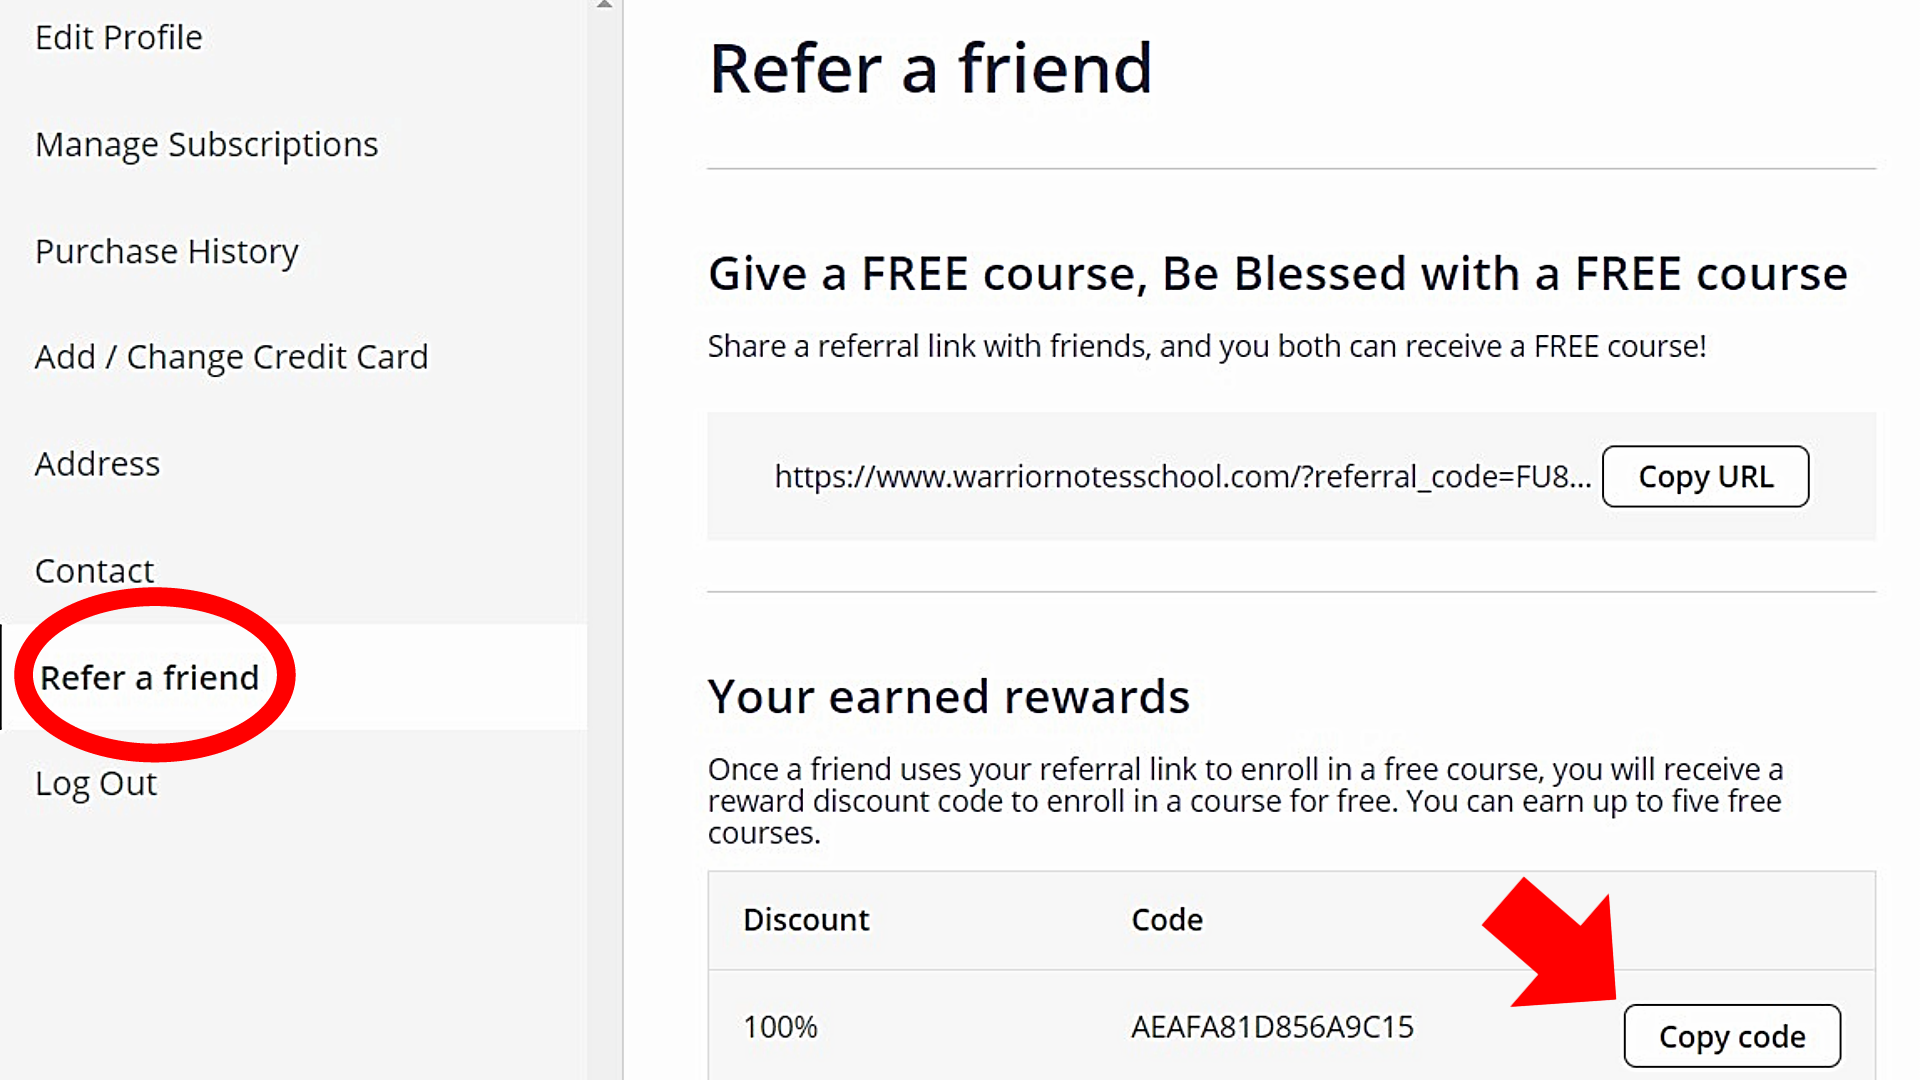 Referral Program Step 3 and 4 image